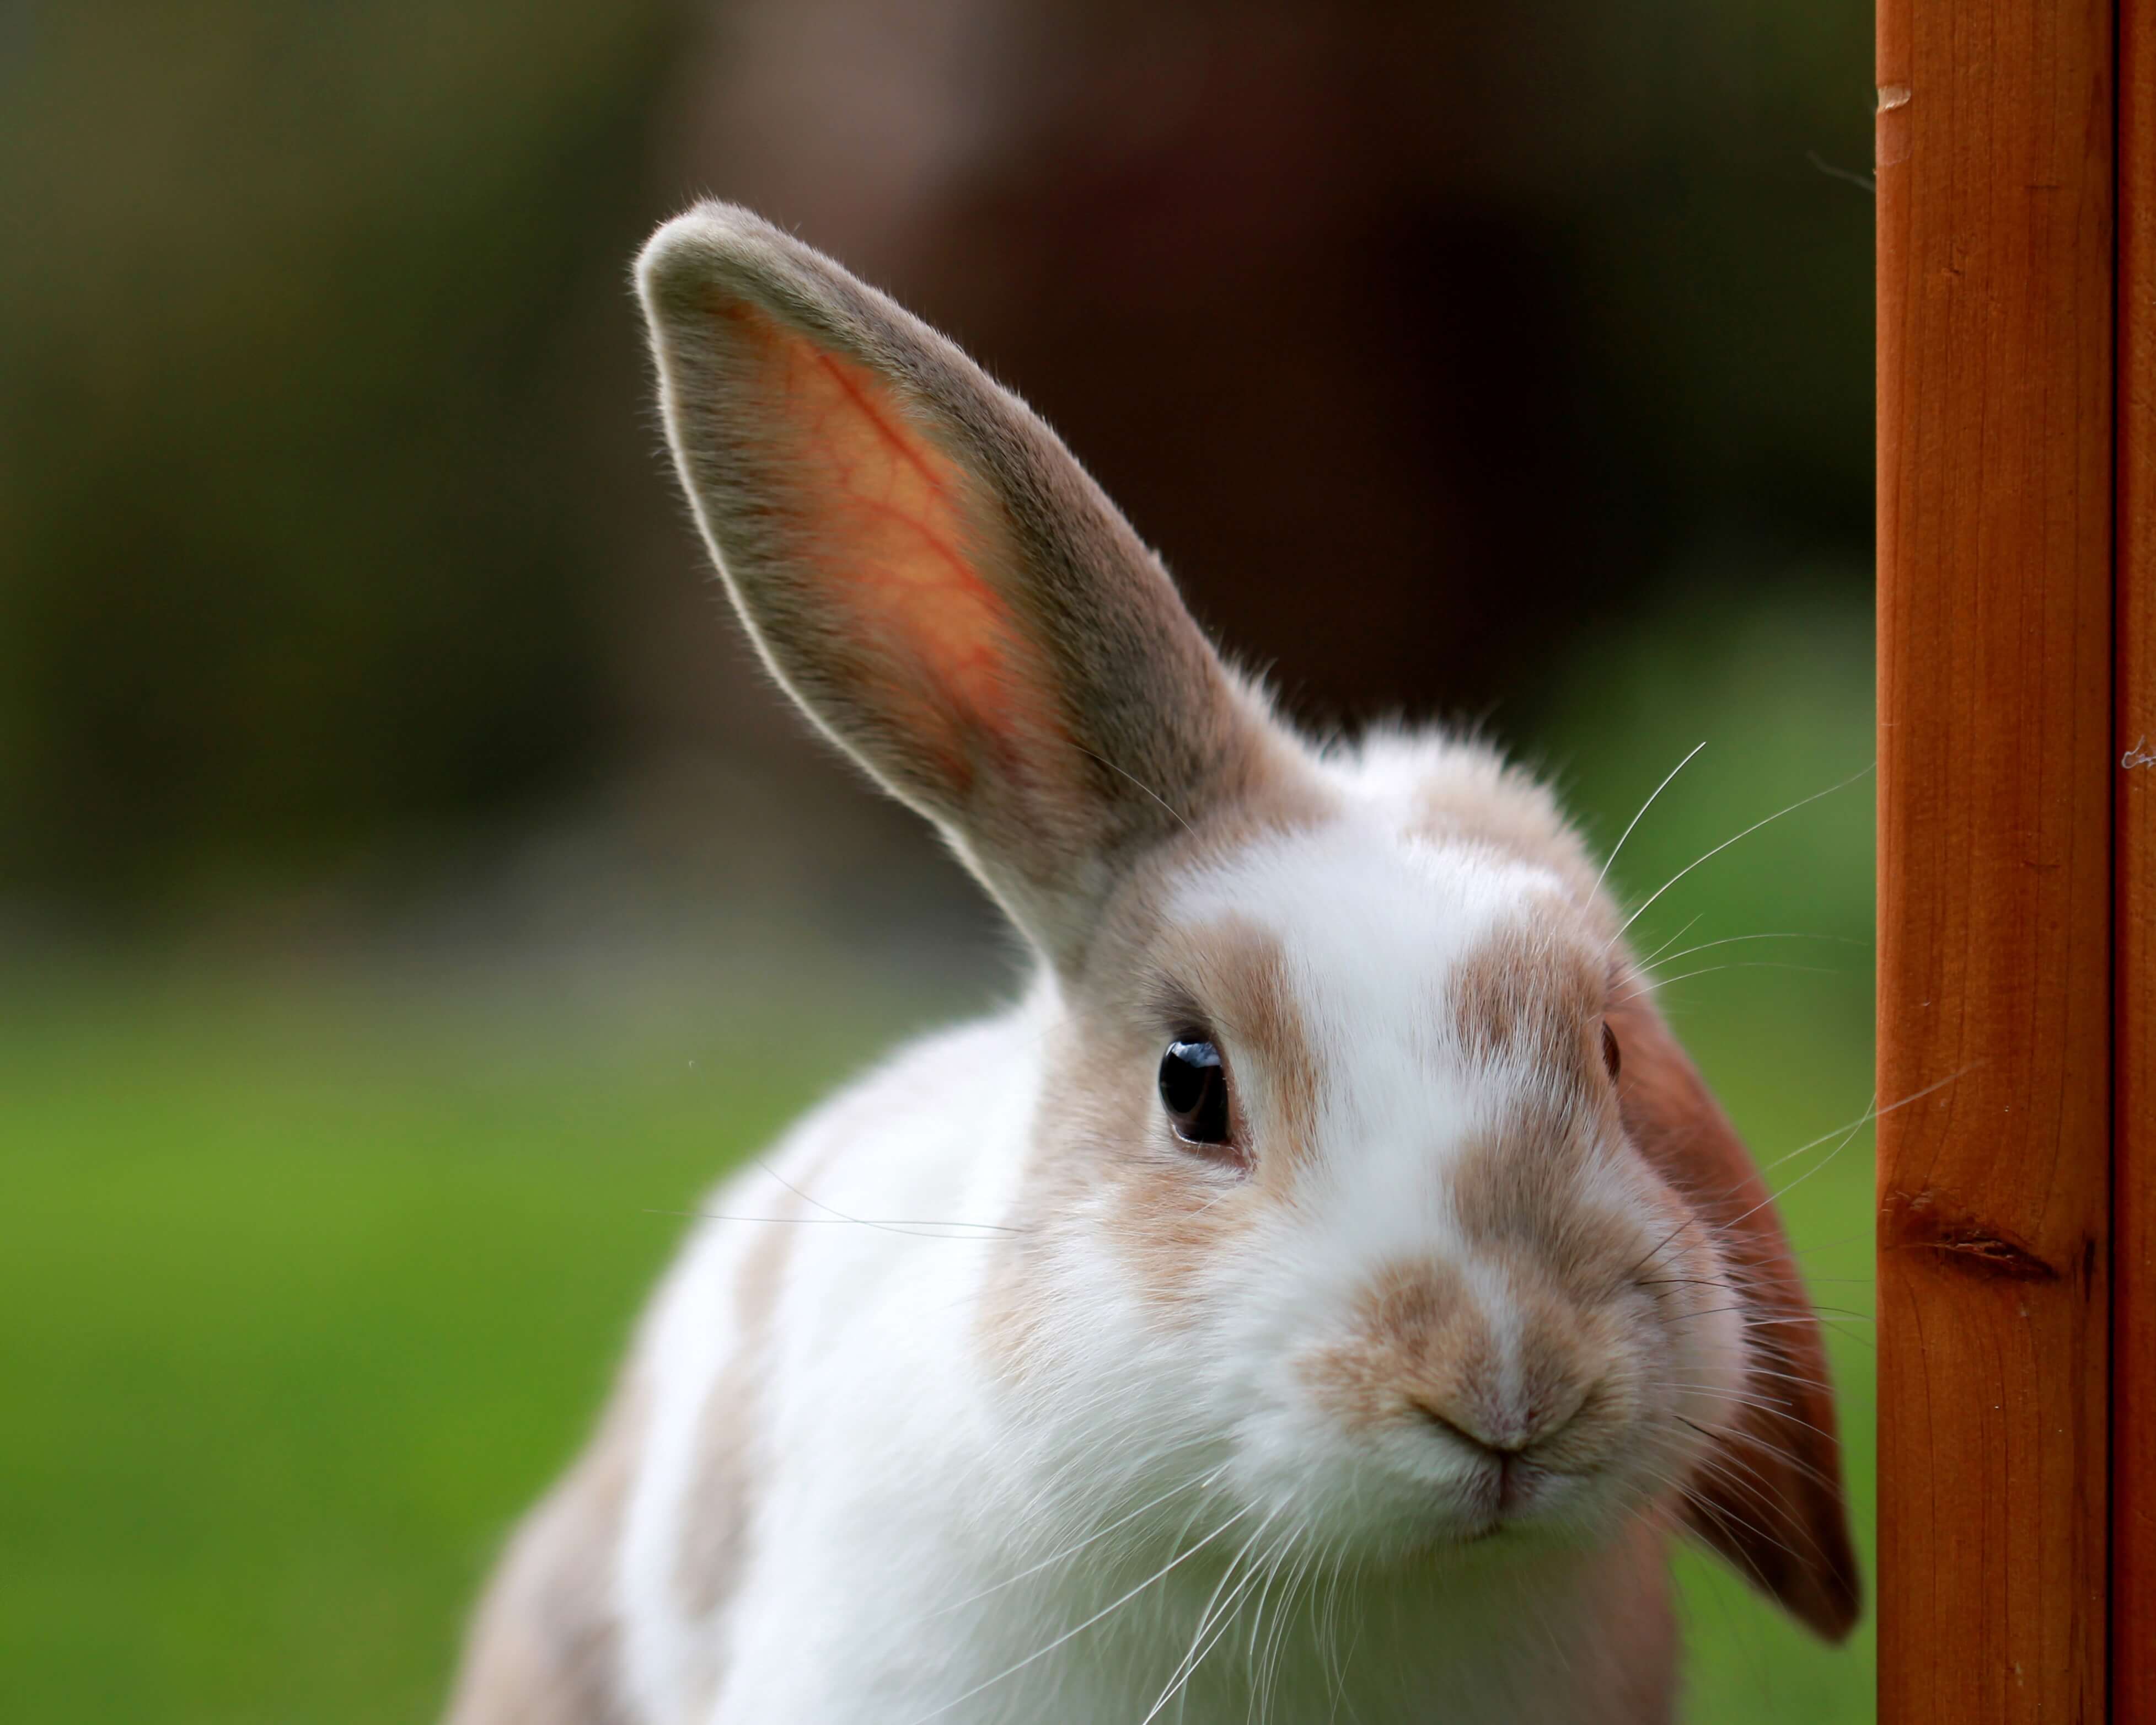 How good is a rabbits hearing?